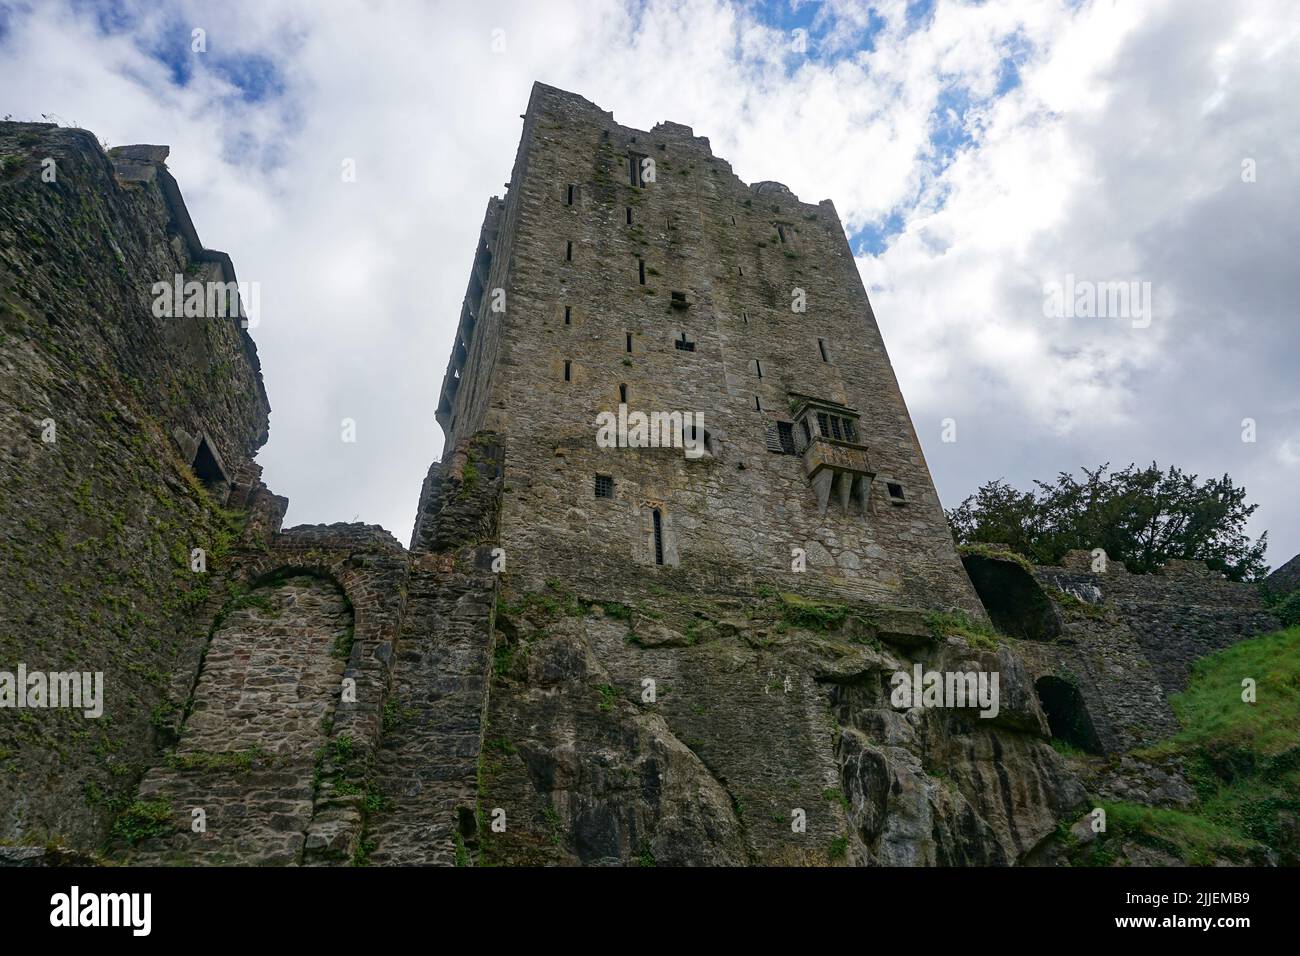 Blarney, Co. Cork, Ireland: The North Wall of Blarney Castle, a medieval stronghold built in 1446. Stock Photo